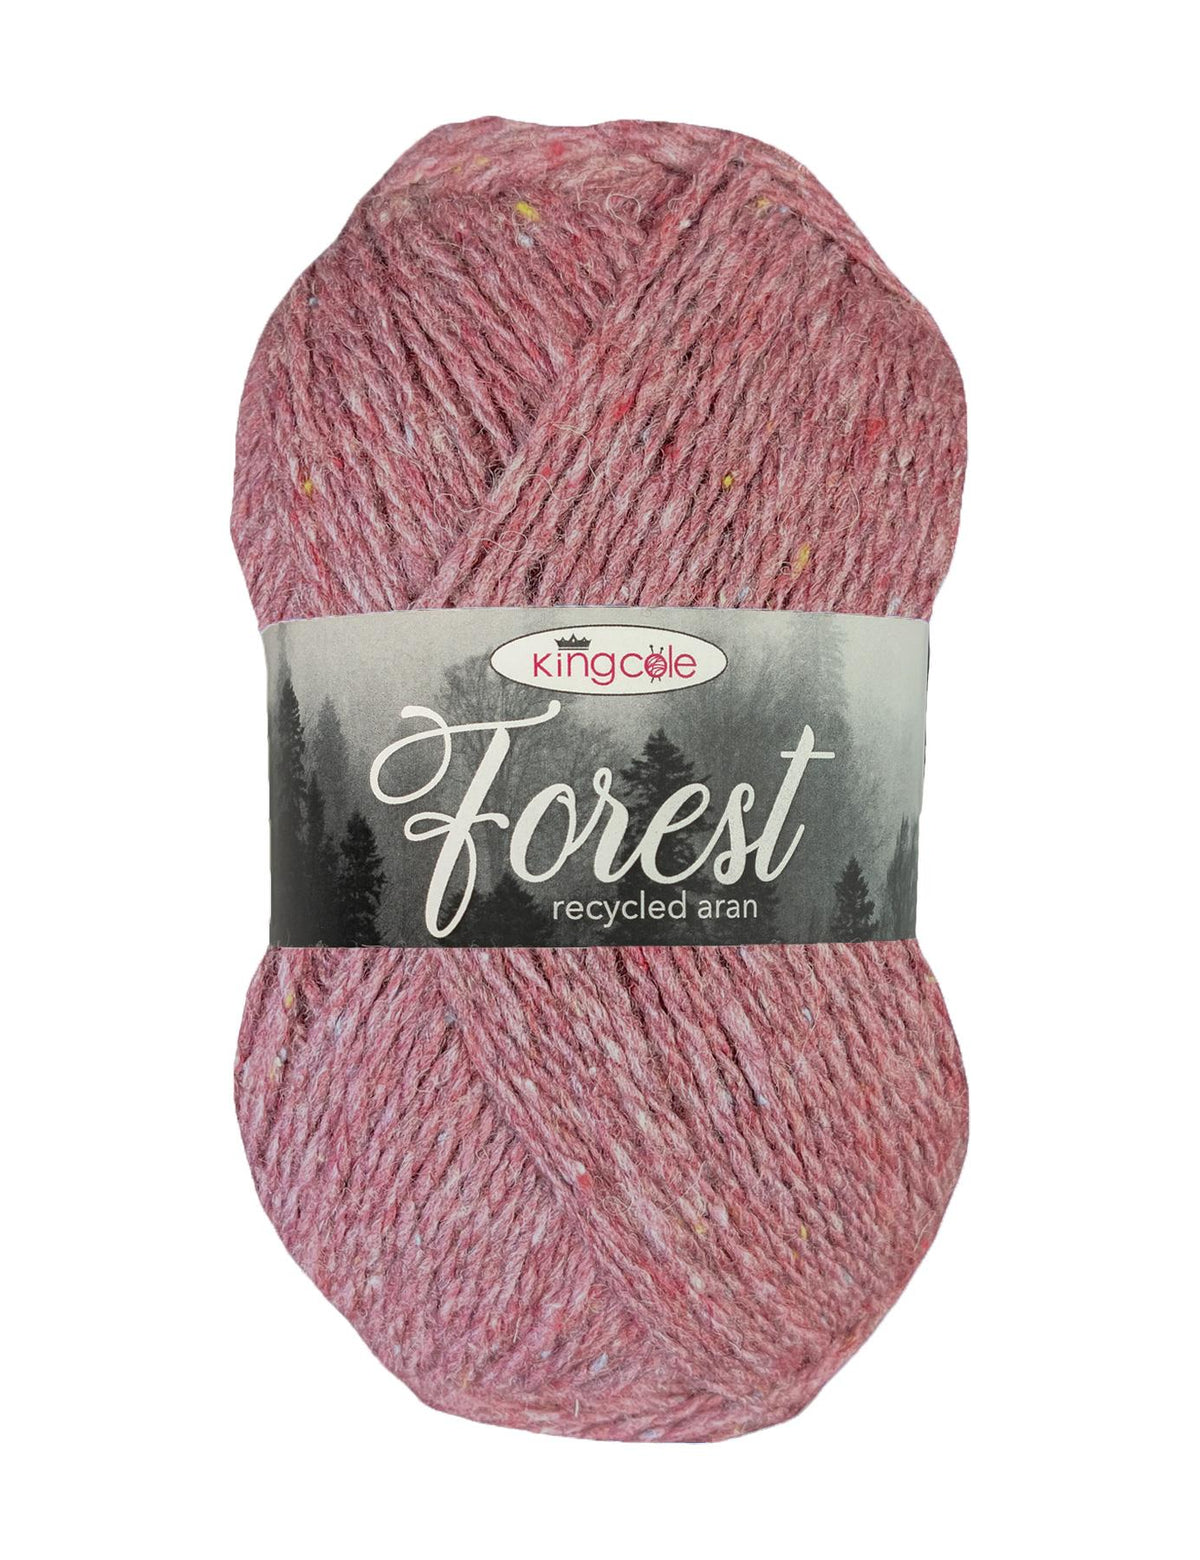 Sherwood Forest 100% recycled aran yarn by King Cole (100g)